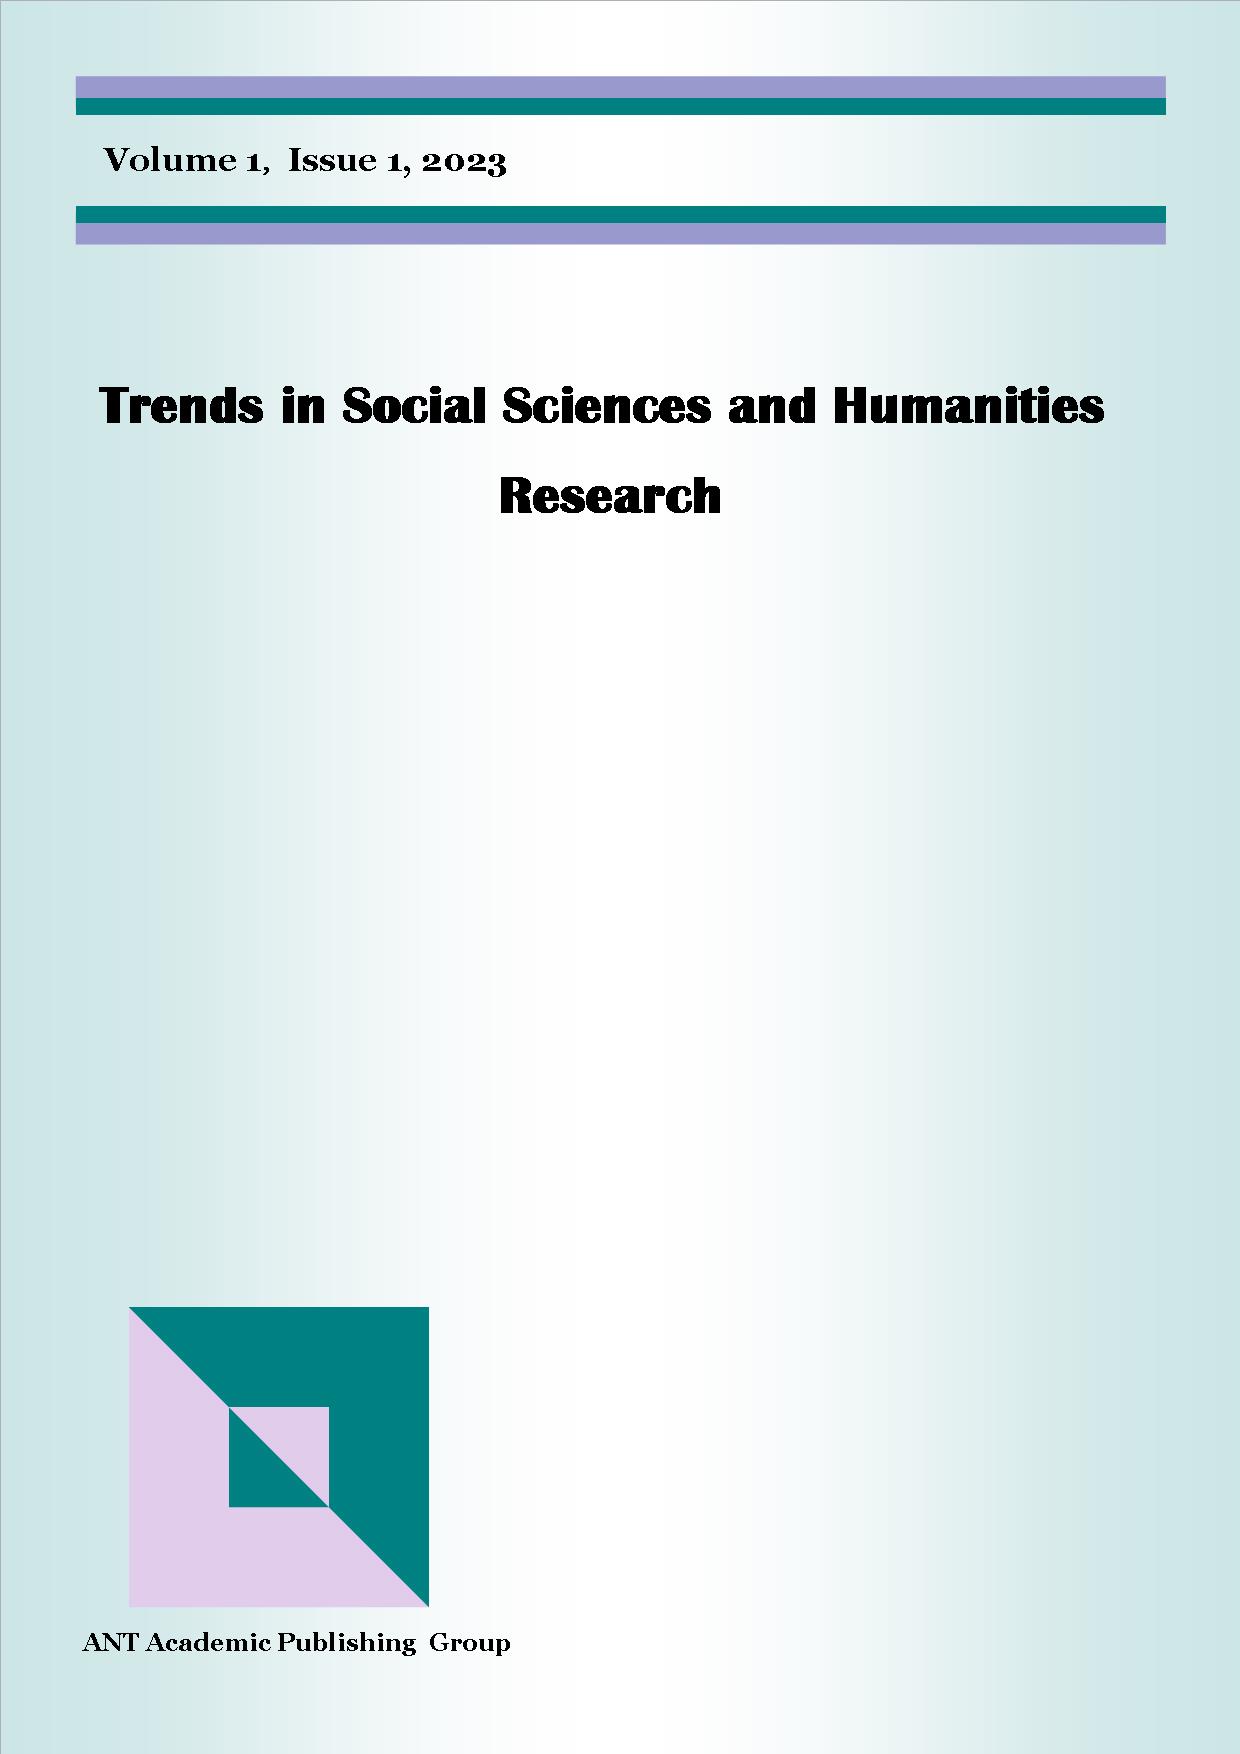 Trends in Social Sciences and Humanities Research